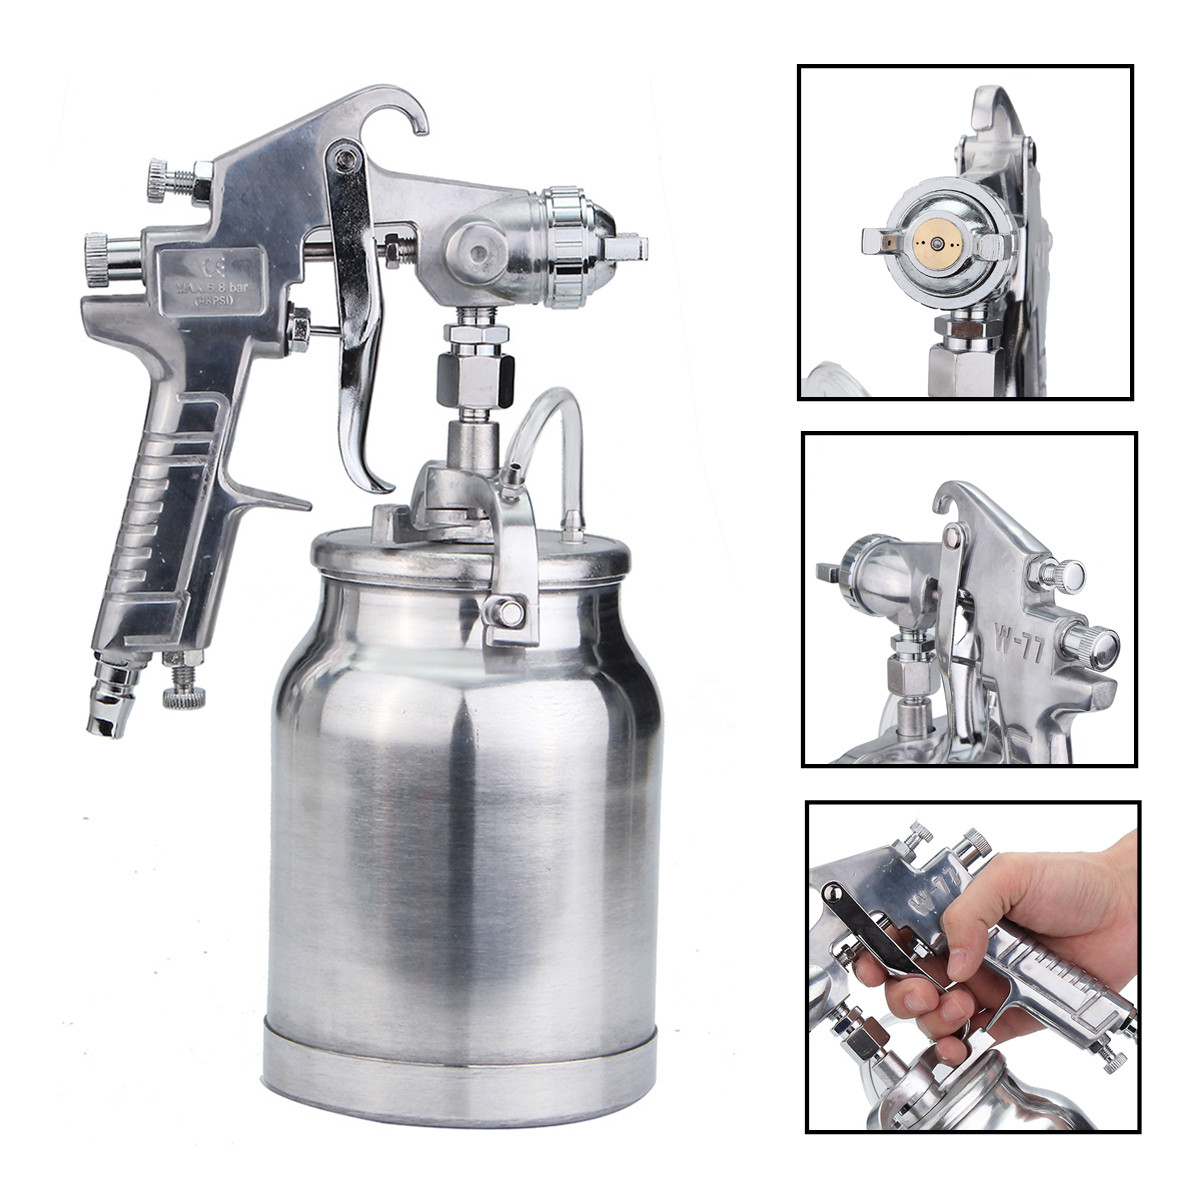 3-In-1-Suction-Feed-Heavy-Duty-Paint-Spray-Sprayer-1L-Pot-14Inch-Air-Hose-Fitting-1264292-7